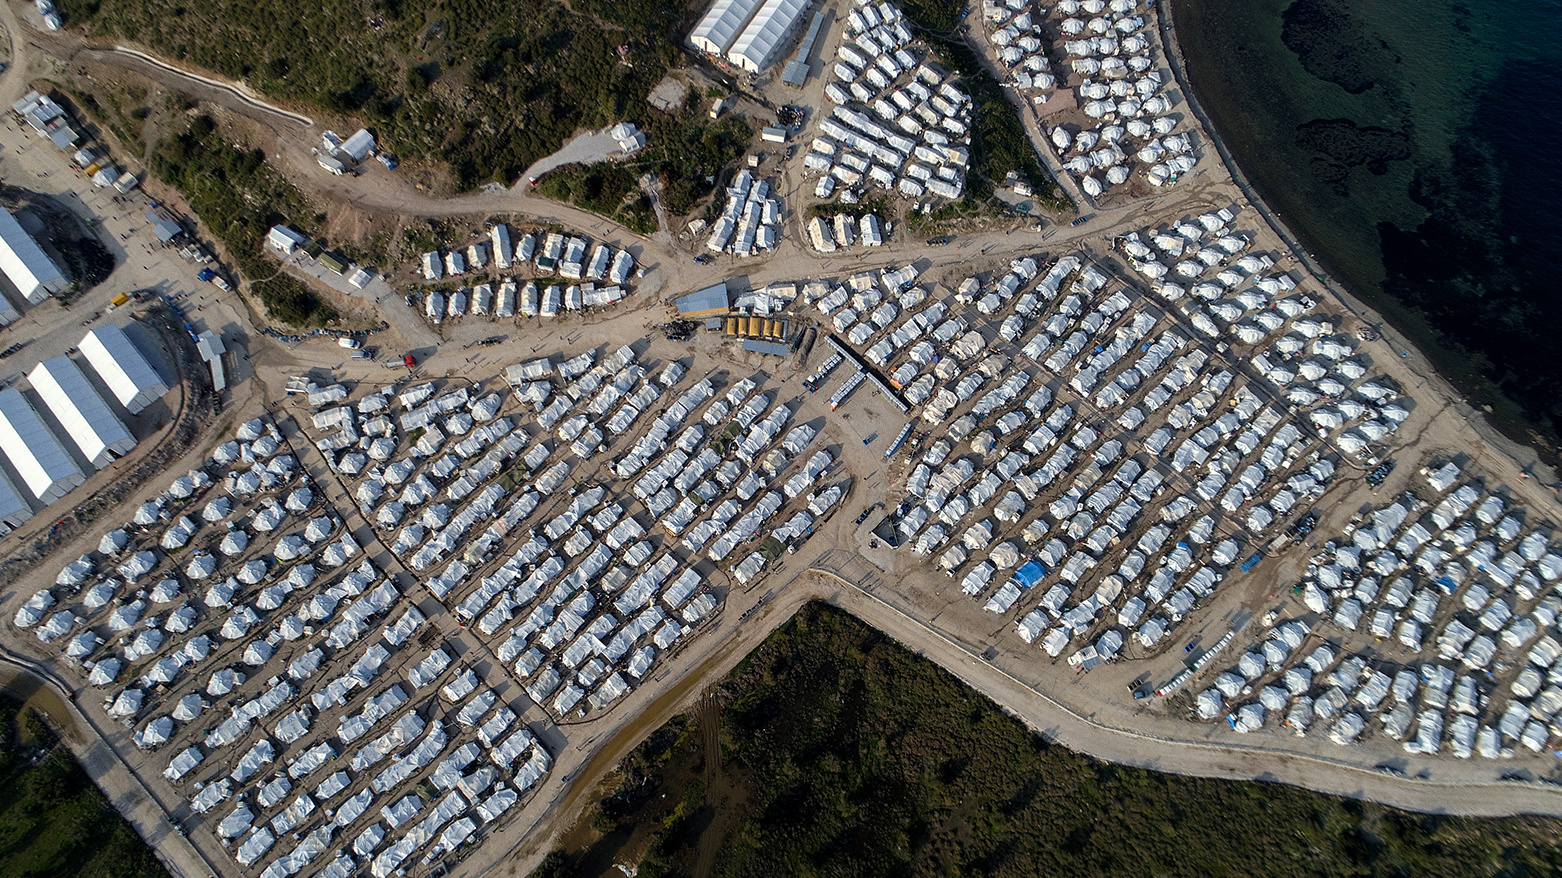 Tents are seen from above at Karatepe refugee camp, on the eastern Aegean island of Lesbos, Greece. (AP Photo/Panagiotis Balaskas)